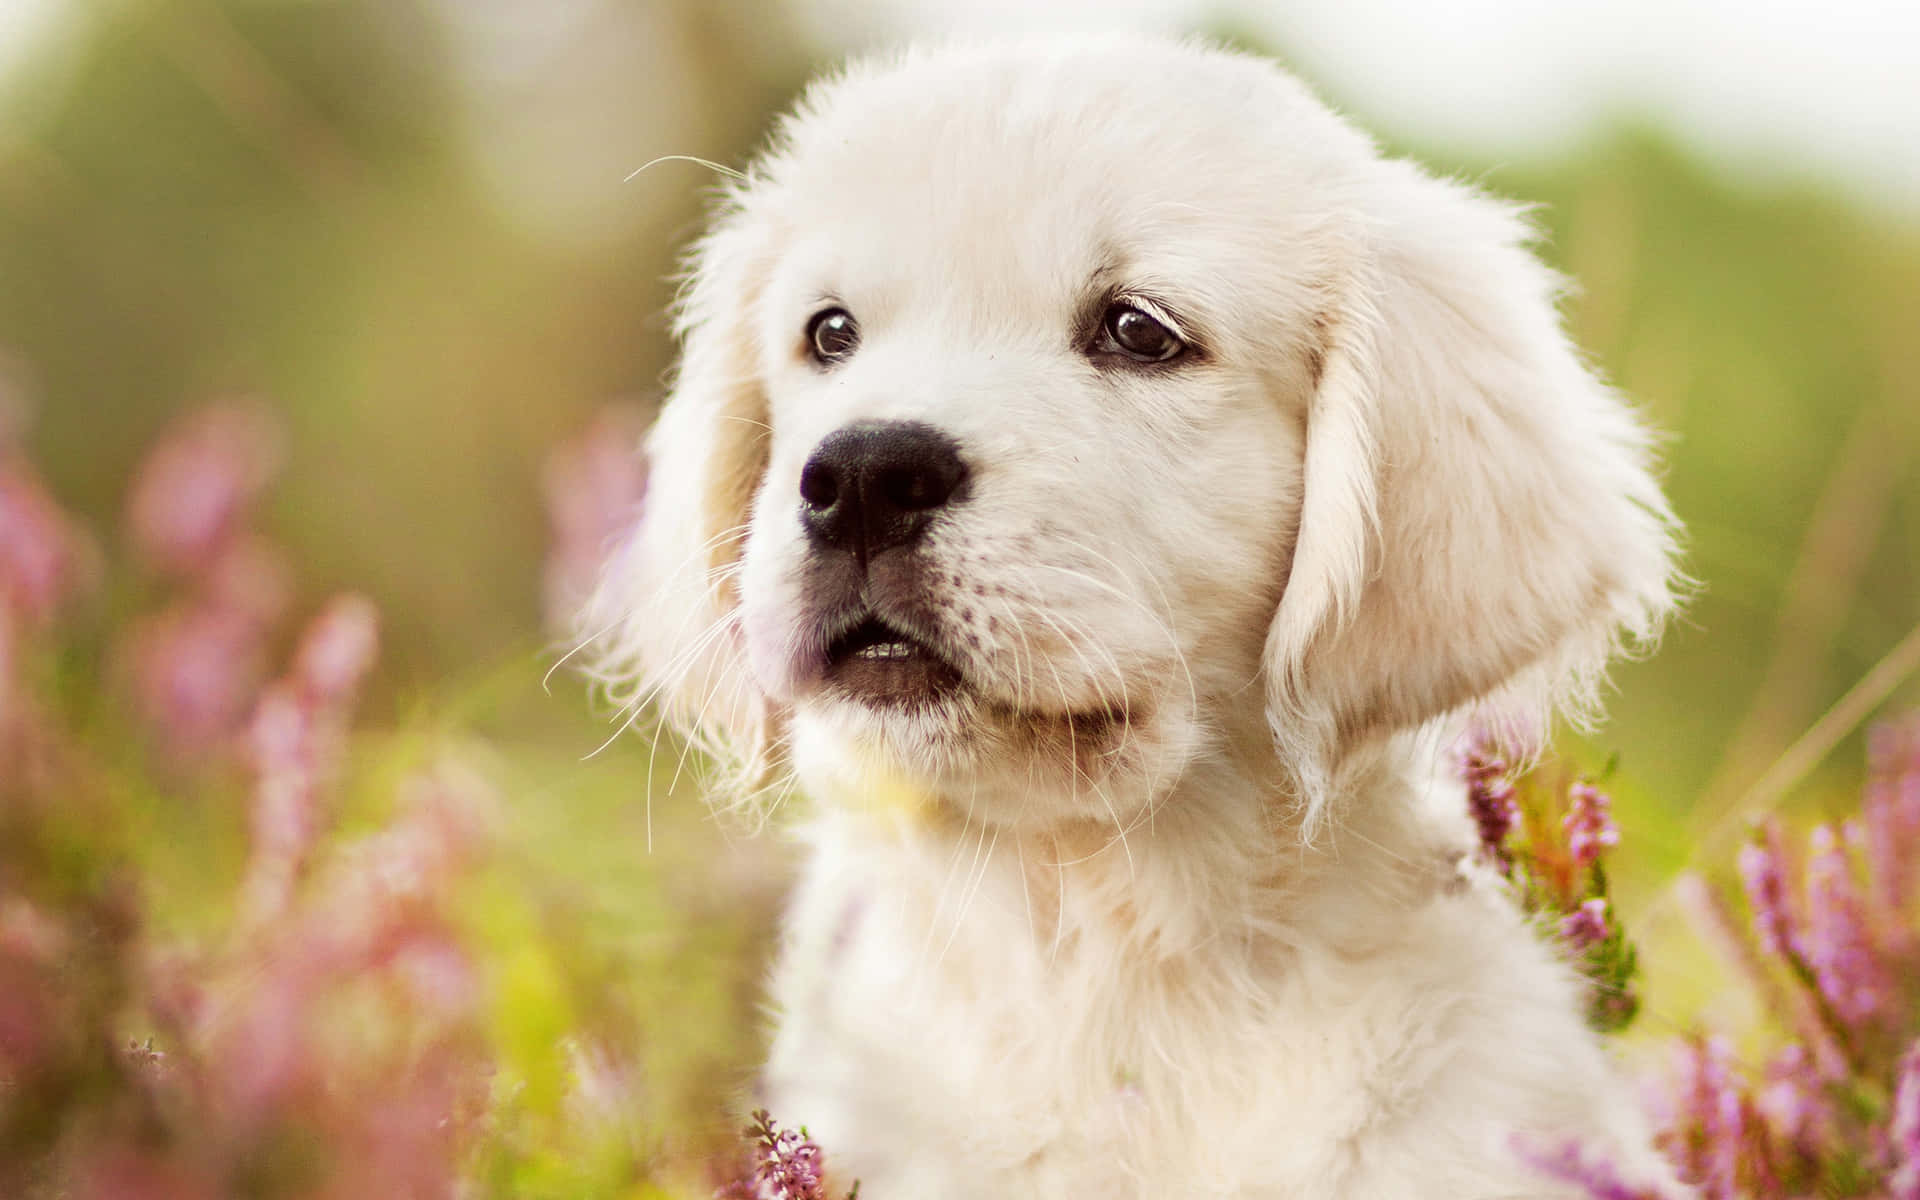 \"This Golden Retriever Puppy is Absolutely Adorable!\" Wallpaper